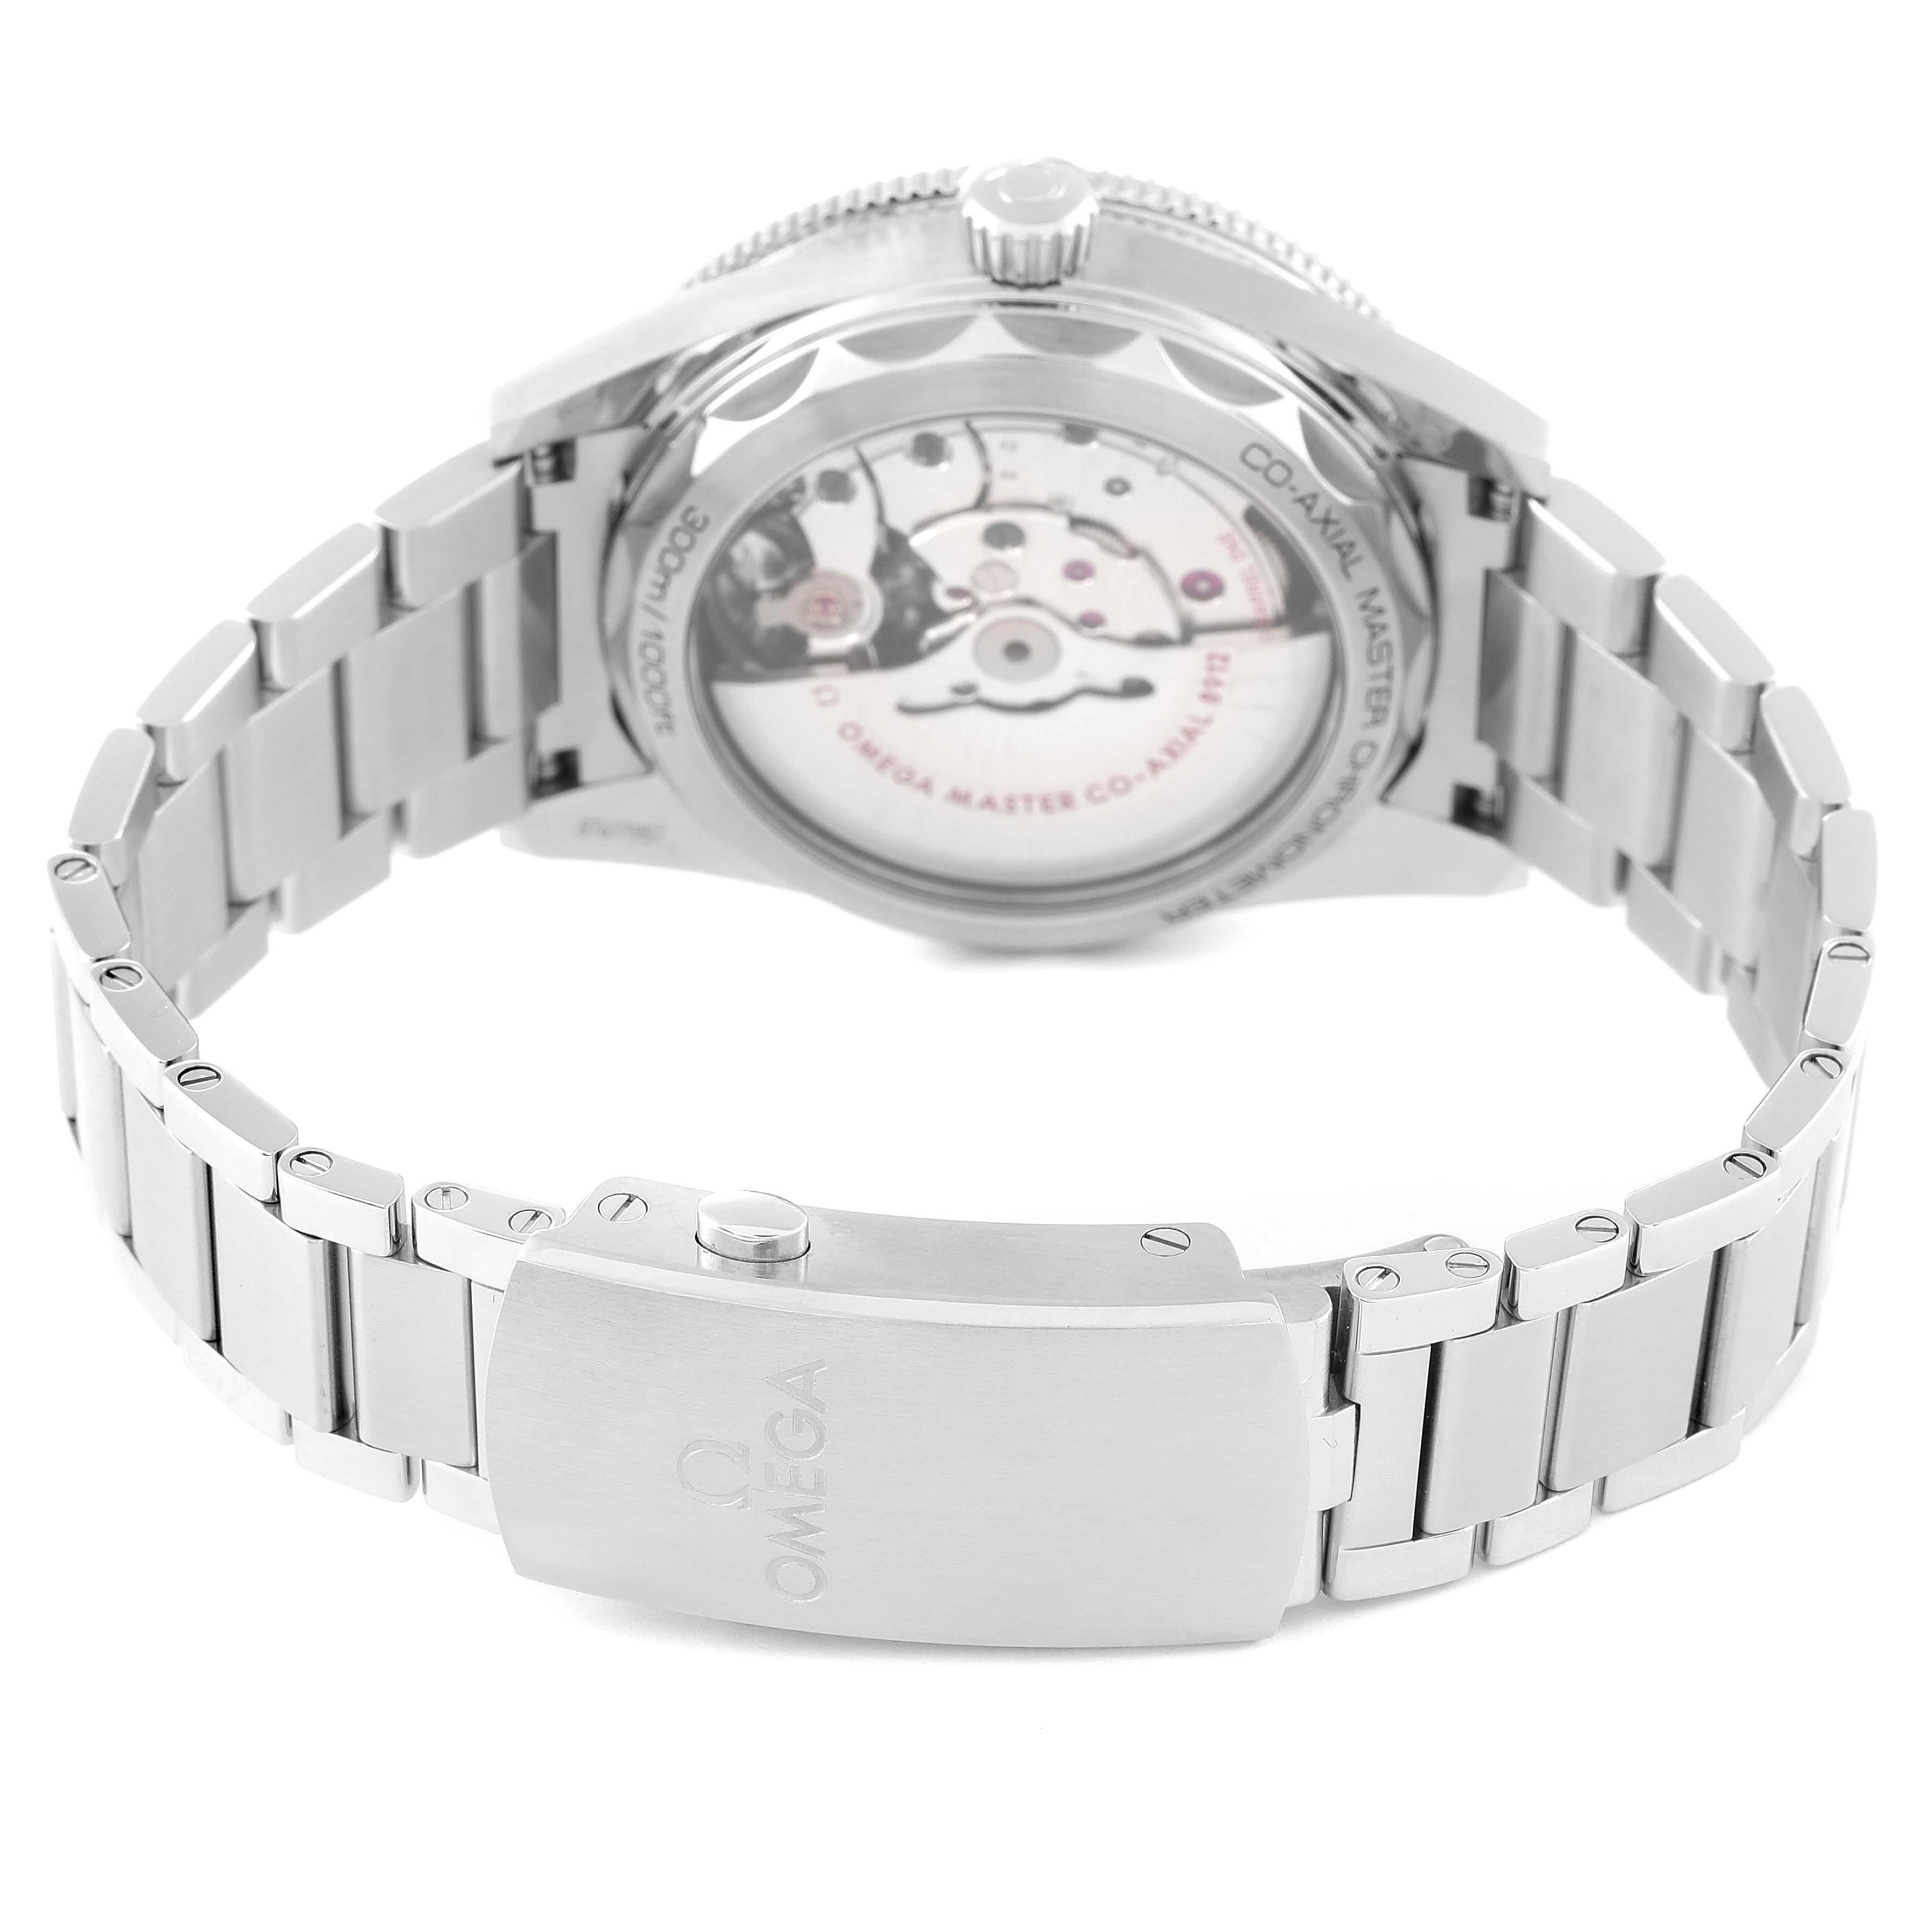 Men's Omega Seamaster 300 Co-Axial Steel Mens Watch 234.30.41.21.01.001 Box Card For Sale